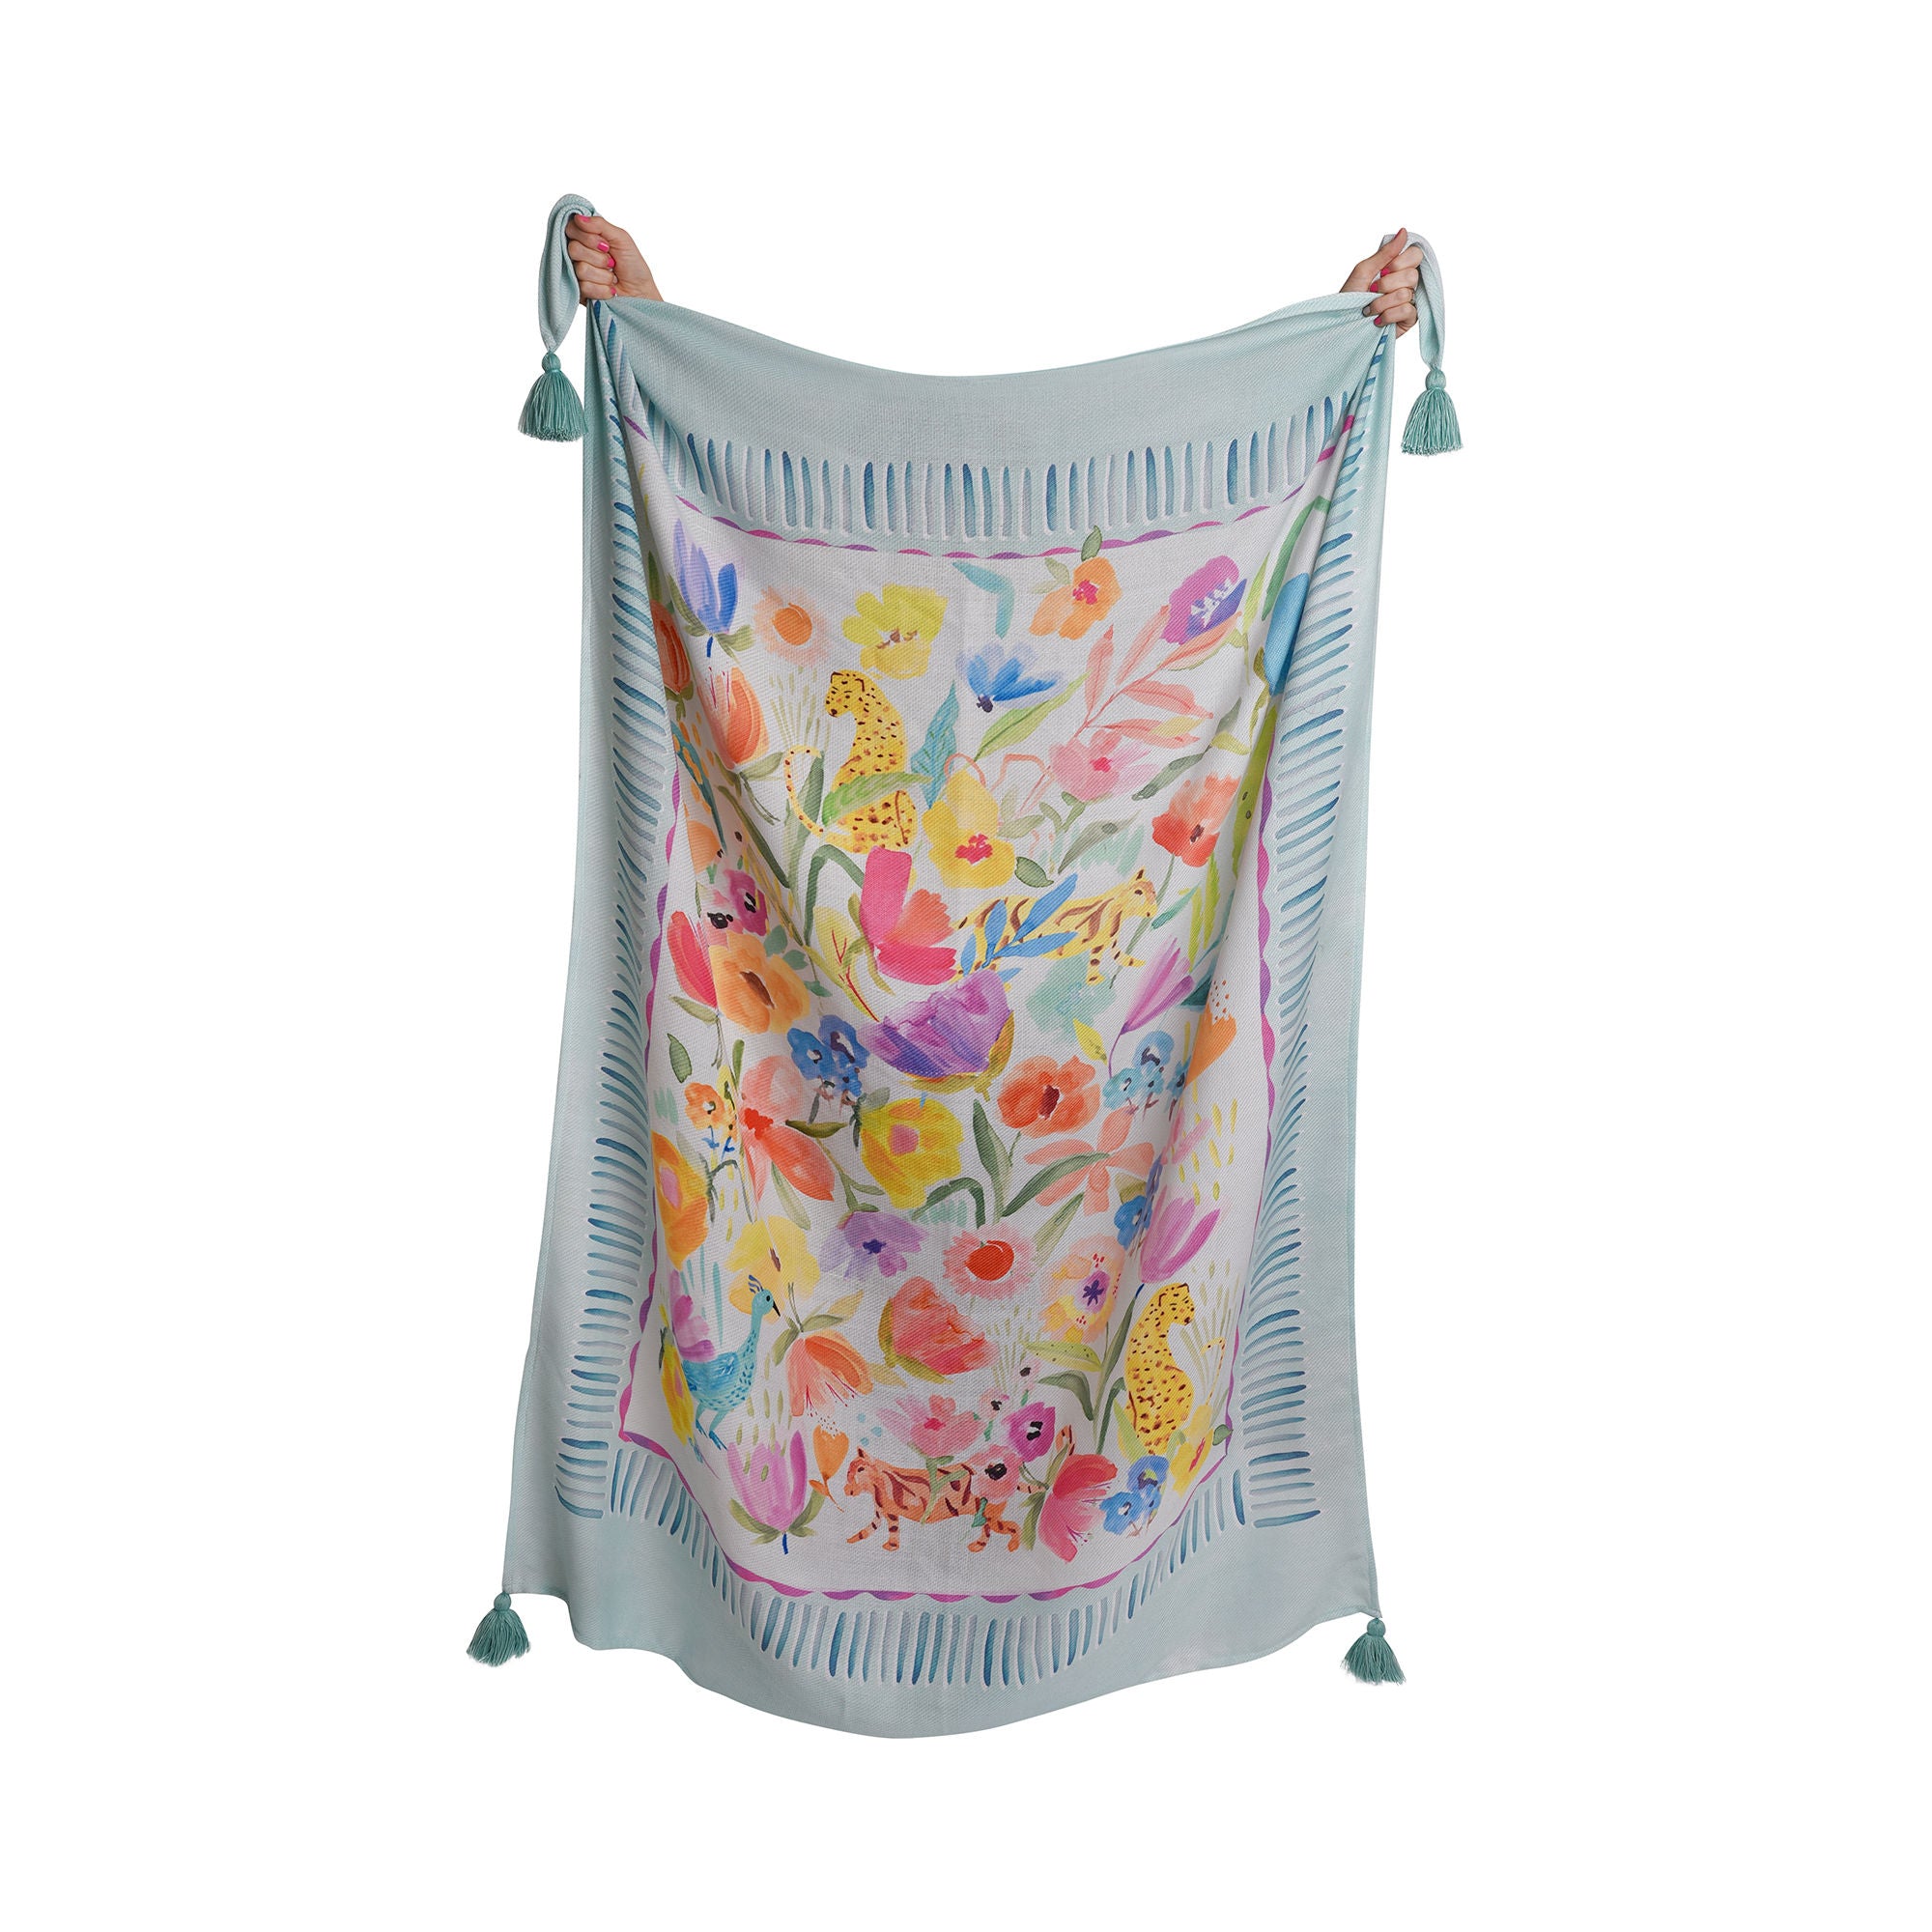 Festival Throw by Appletree Style in Duck Egg 130 x 180cm